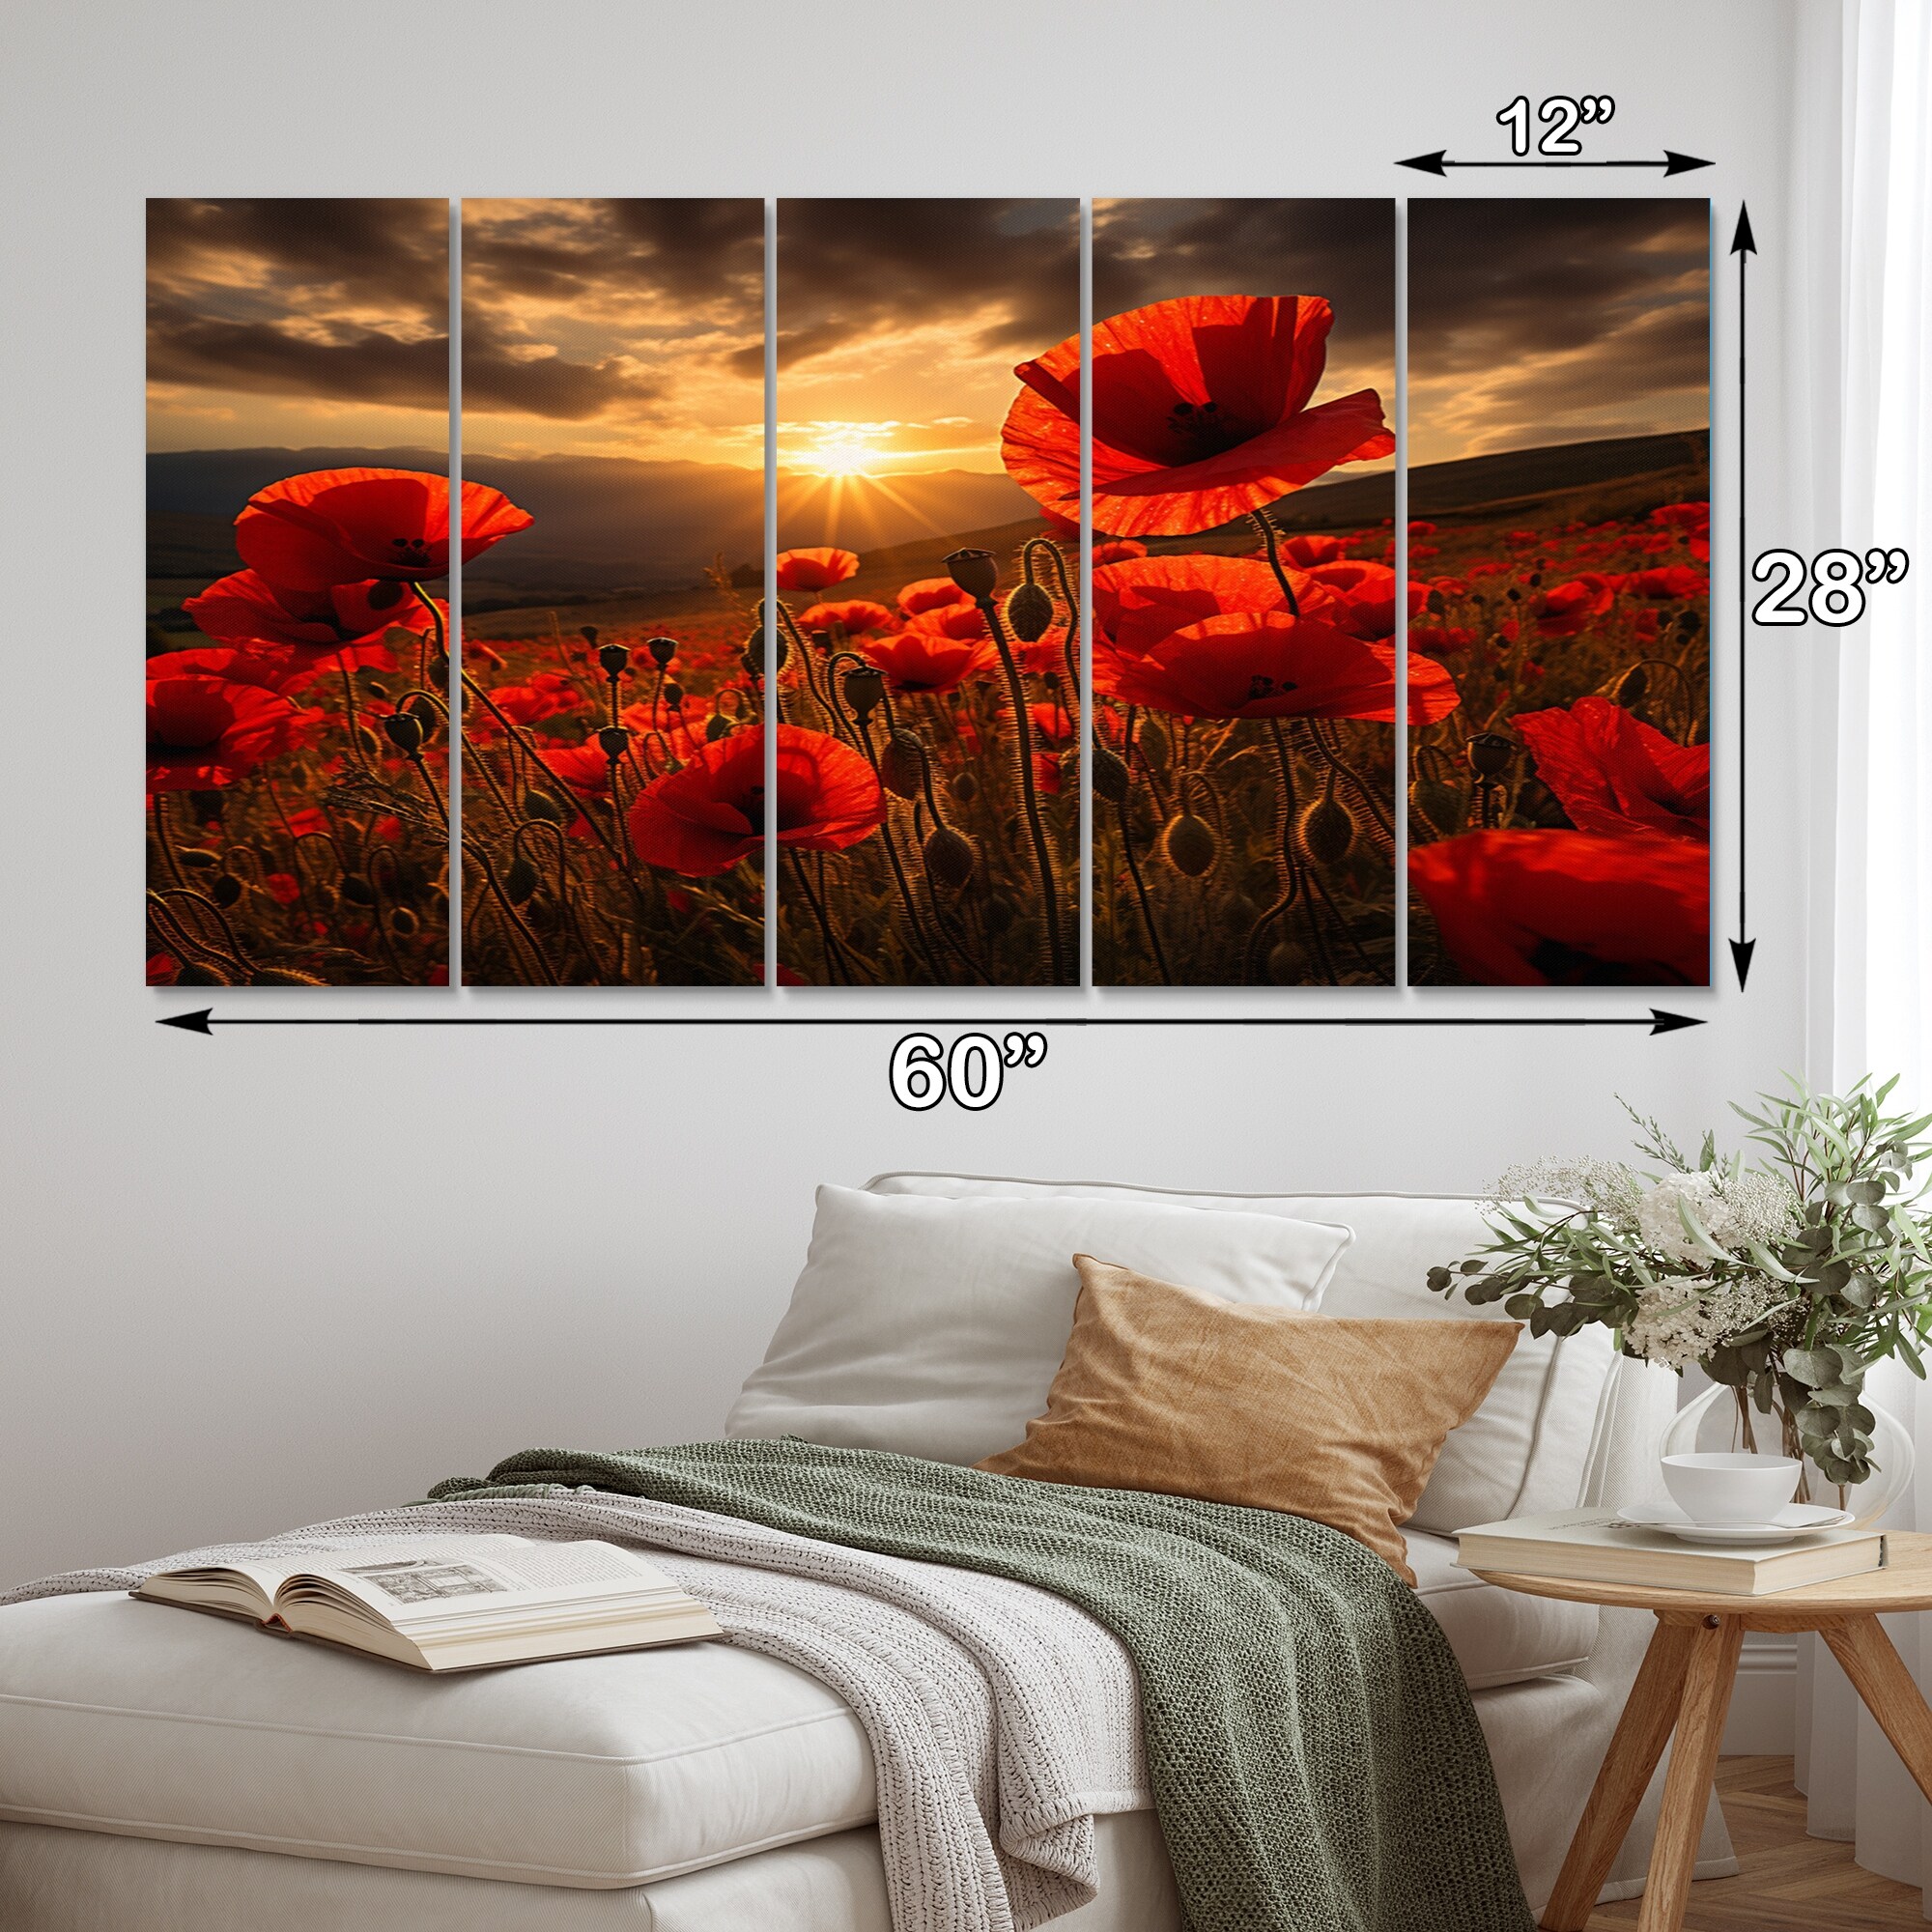 https://ak1.ostkcdn.com/images/products/is/images/direct/42ae533f50e4c6572fa7abfc52c49987a8de61b4/Designart-%22Red-Poppies-Field-With-Sunset-III%22-Floral-Multipanel-Canvas-Art-Print-set.jpg